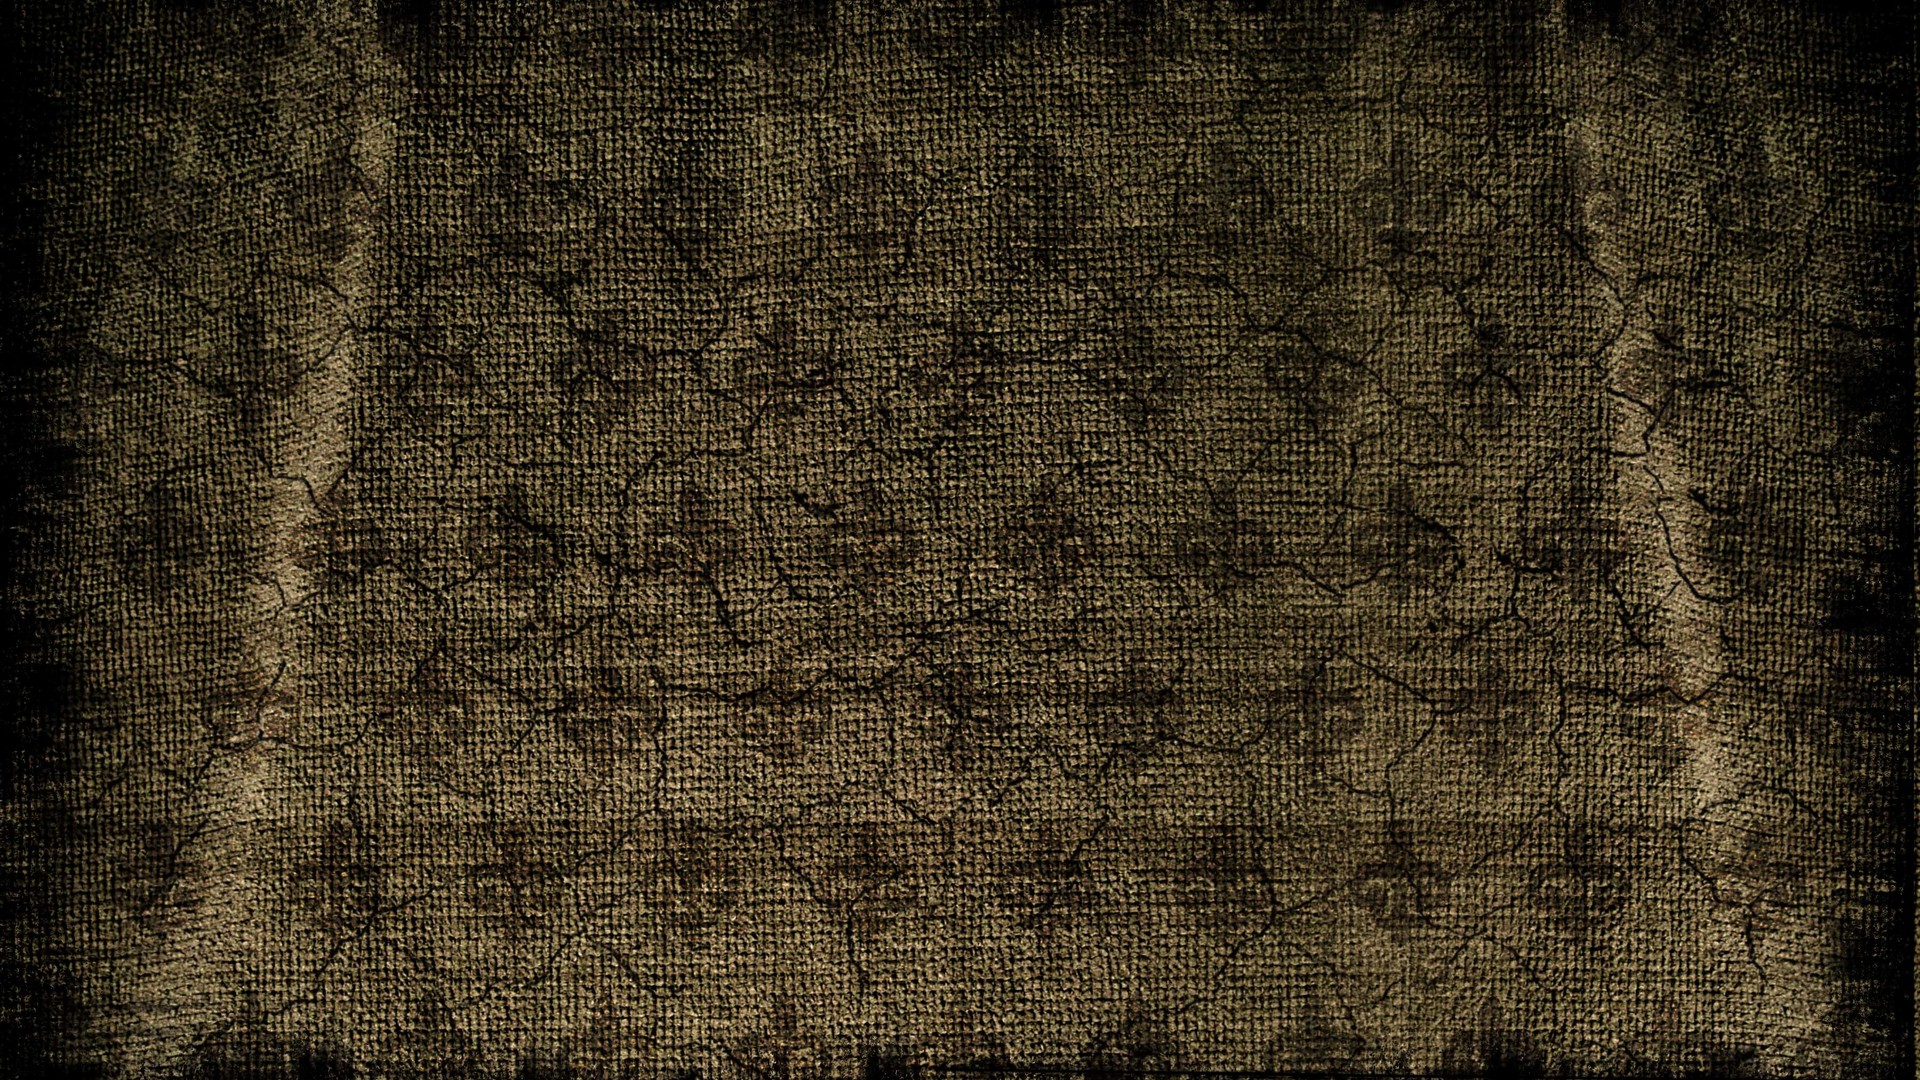 General 1920x1080 pattern texture abstract